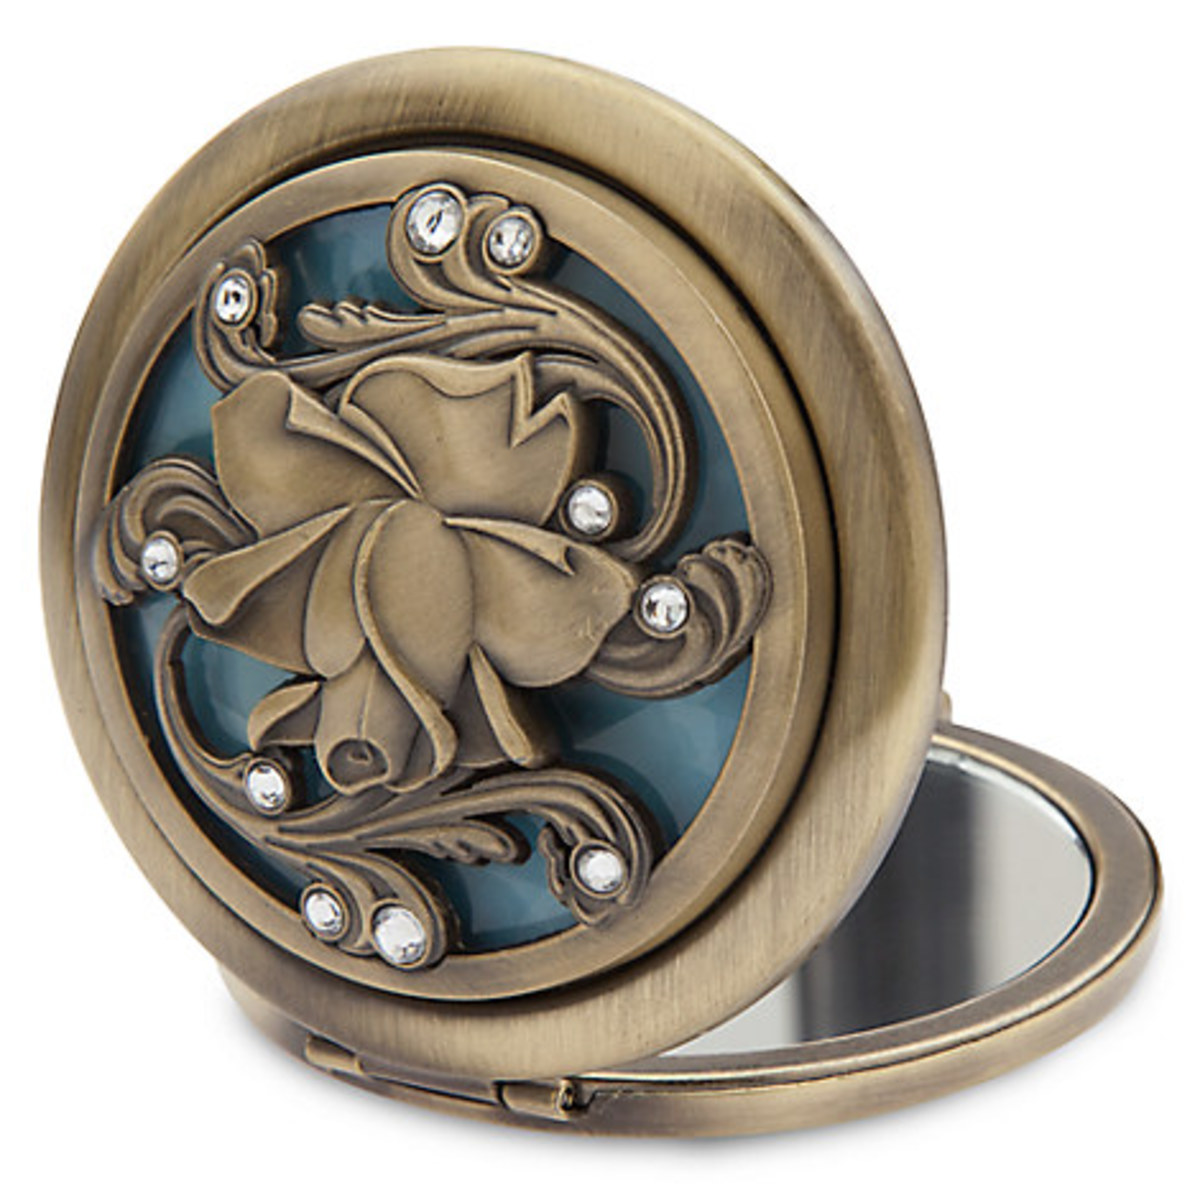 For all those Belle fans out there, this "Beauty and the Beast" pocket mirror is the perfect Valentine's gift. 